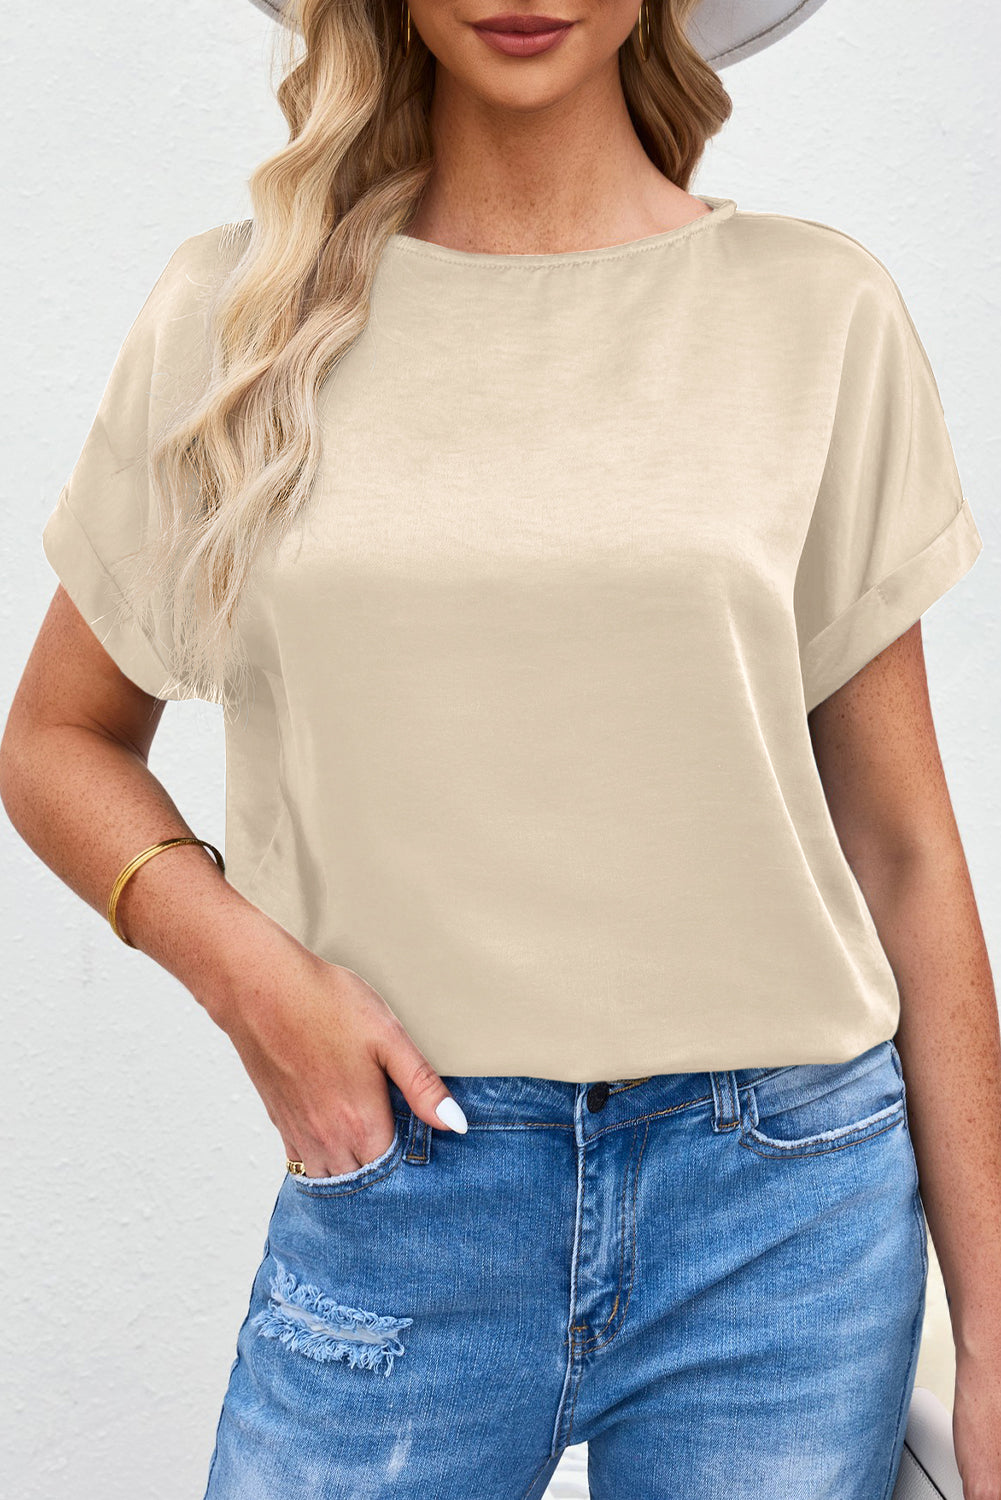 Apricot Solid Color Short Sleeve T Shirt